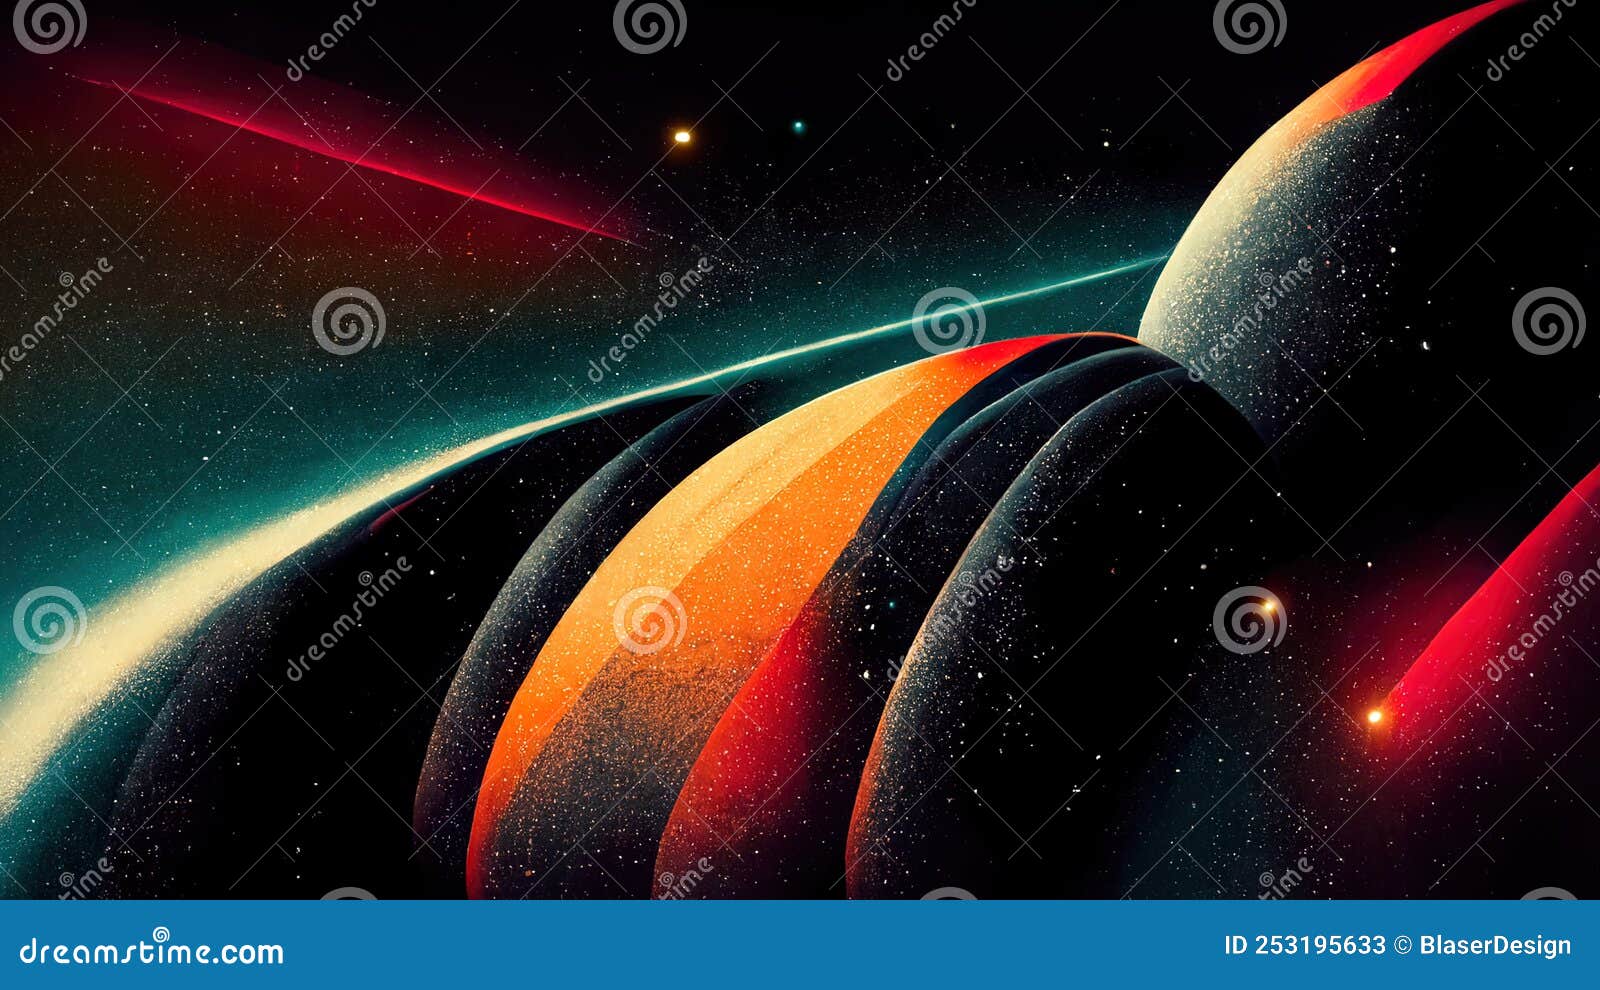 Retro Futuristic, Space Wallpaper. 4K Vintage Background, Colorful Vintage  Abstract Galaxy Illustration. Stock Illustration - Illustration Of Galaxy,  Background: 253195633